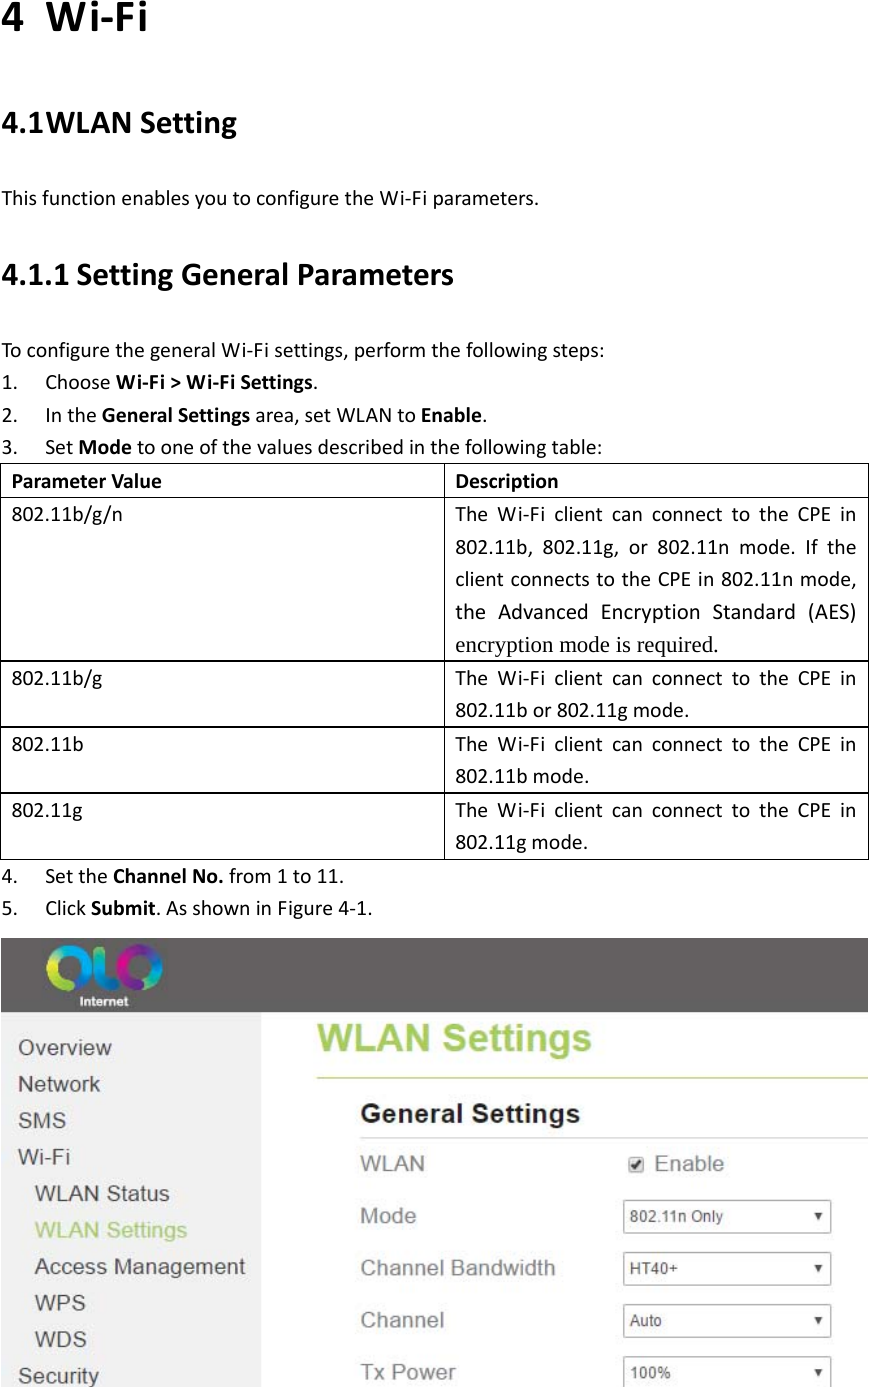   4 Wi‐Fi4.1 WLANSettingThisfunctionenablesyoutoconfiguretheWi‐Fiparameters.4.1.1 SettingGeneralParametersToconfigurethegeneralWi‐Fisettings,performthefollowingsteps:1. ChooseWi‐Fi&gt;Wi‐FiSettings.2. IntheGeneralSettingsarea,setWLANtoEnable.3. SetModetooneofthevaluesdescribedinthefollowingtable:ParameterValueDescription802.11b/g/nTheWi‐FiclientcanconnecttotheCPEin802.11b,802.11g,or802.11nmode.IftheclientconnectstotheCPEin802.11nmode,theAdvancedEncryptionStandard(AES) encryption mode is required.802.11b/gTheWi‐FiclientcanconnecttotheCPEin802.11bor802.11gmode.802.11bTheWi‐FiclientcanconnecttotheCPEin802.11bmode.802.11gTheWi‐FiclientcanconnecttotheCPEin802.11gmode.4. SettheChannelNo.from1to11.5. ClickSubmit.AsshowninFigure4‐1.